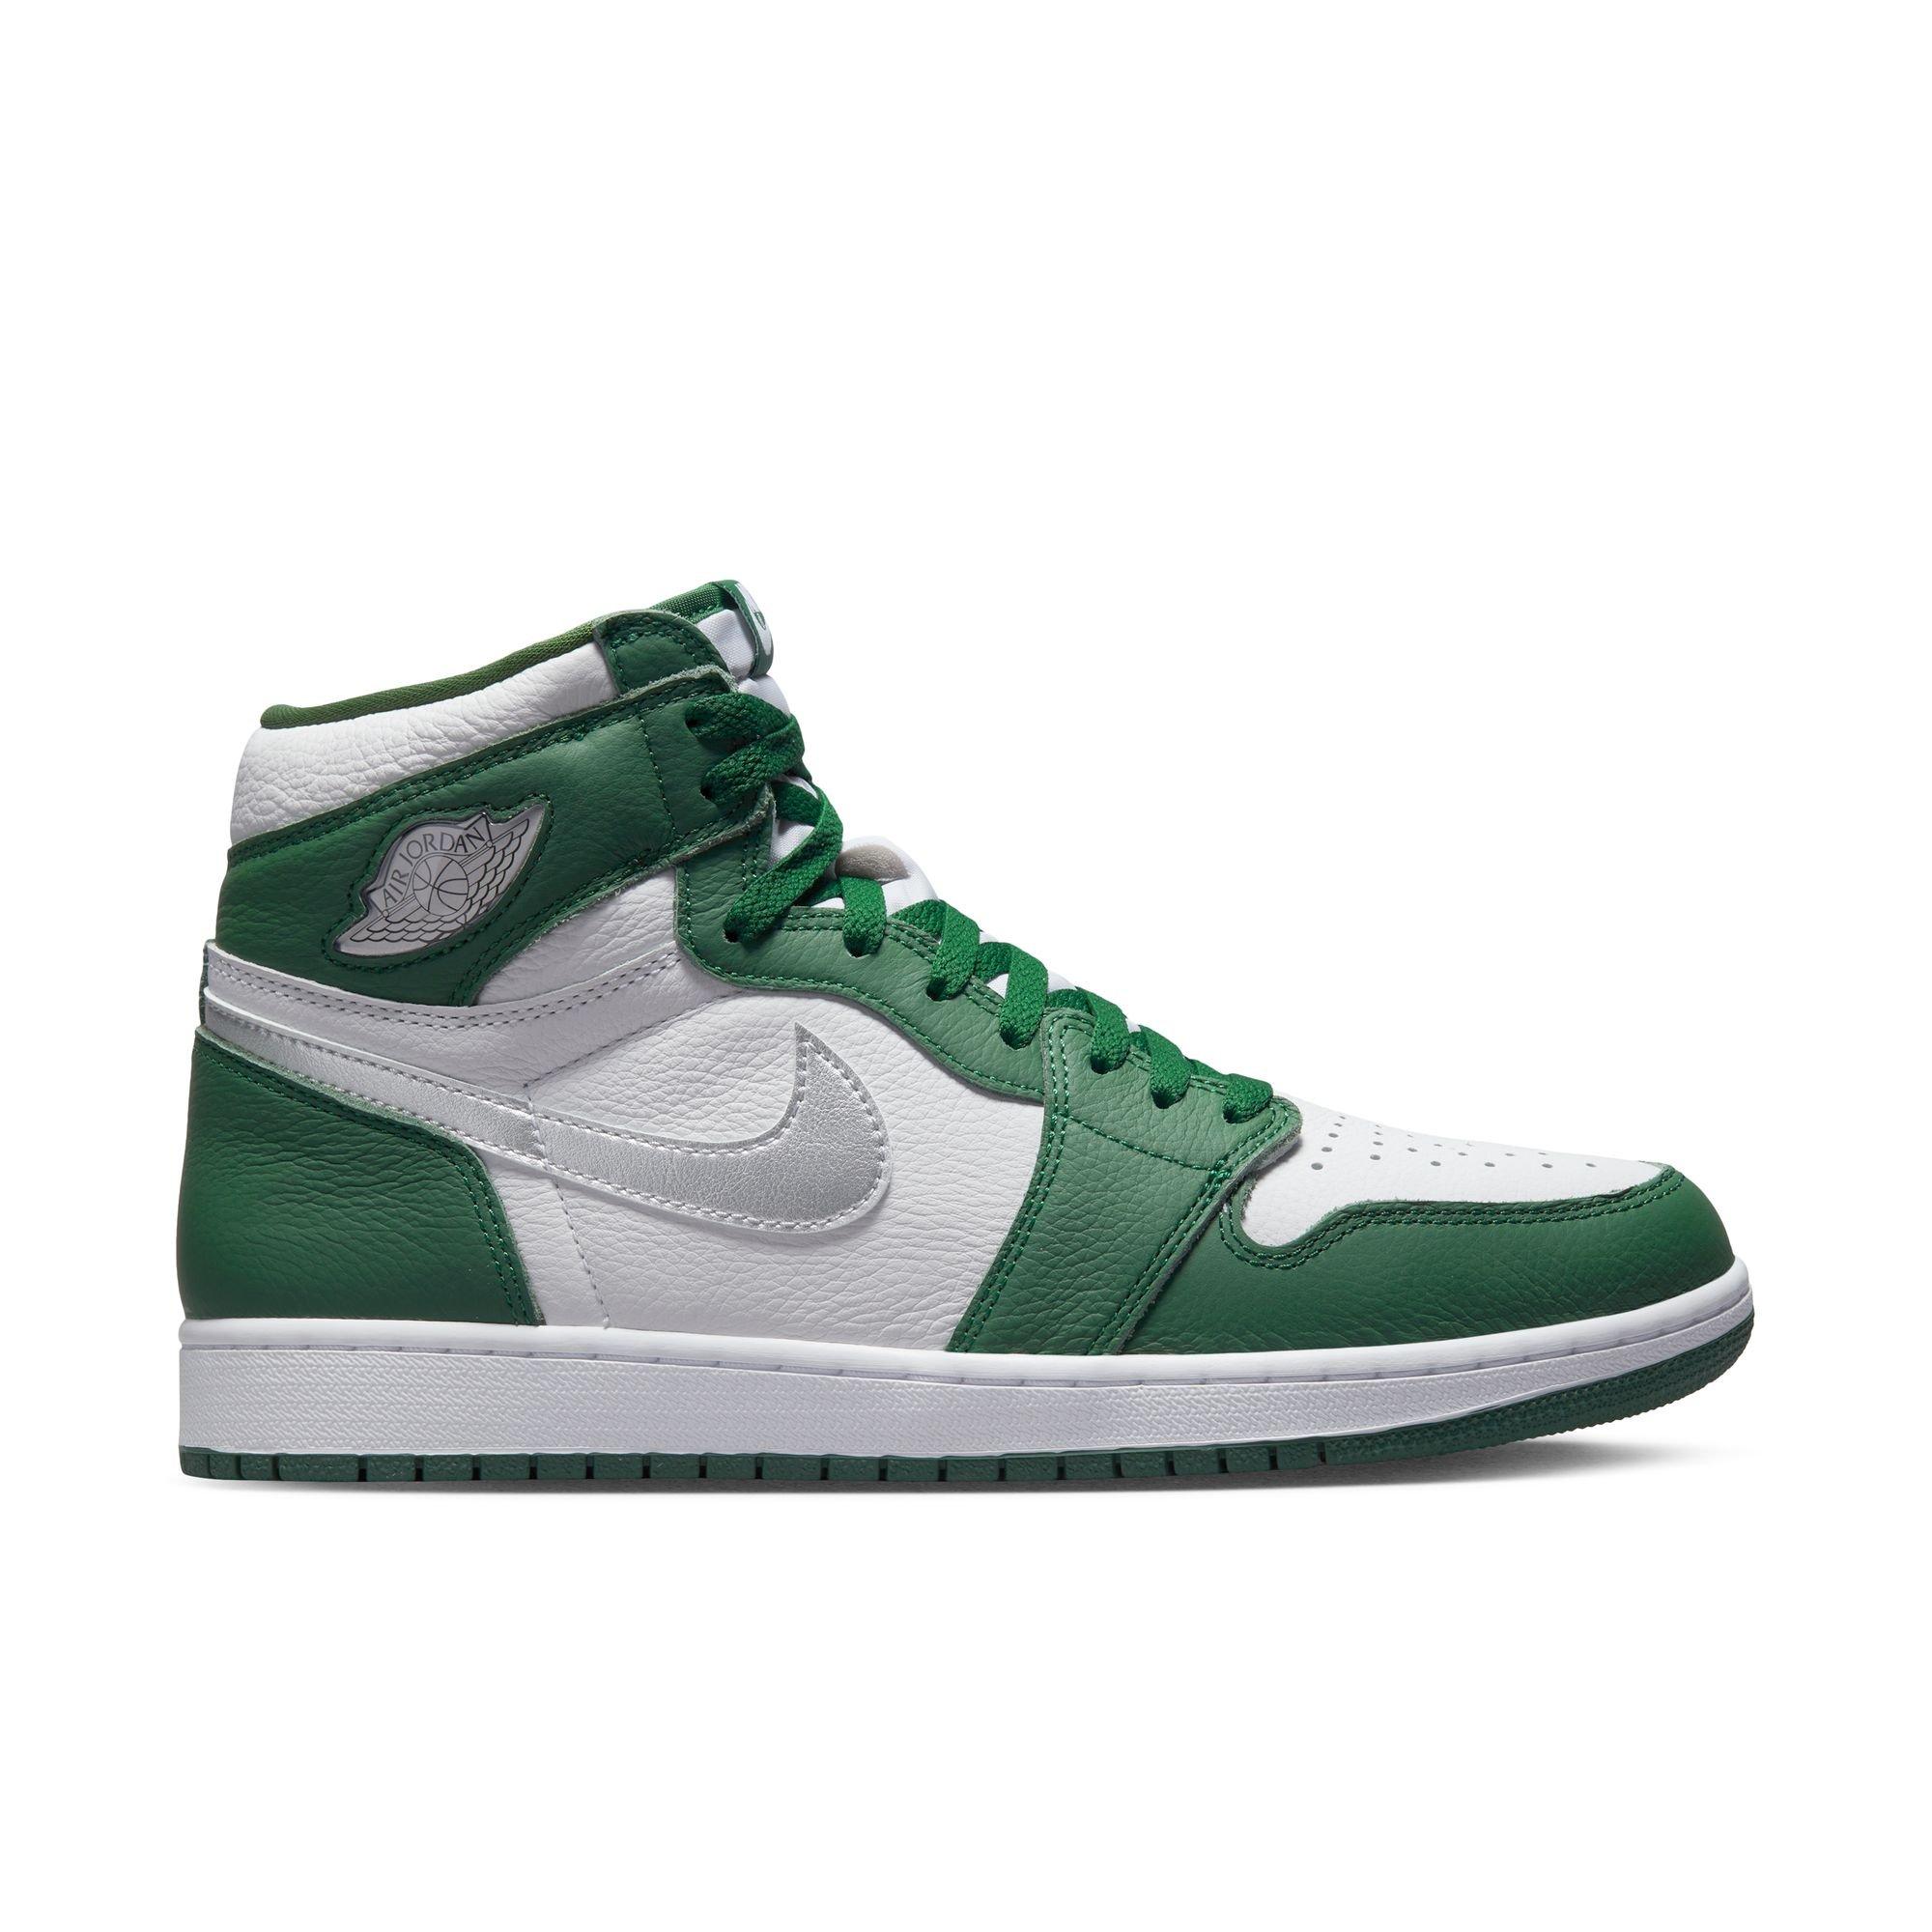 green and white jordan 1 release date